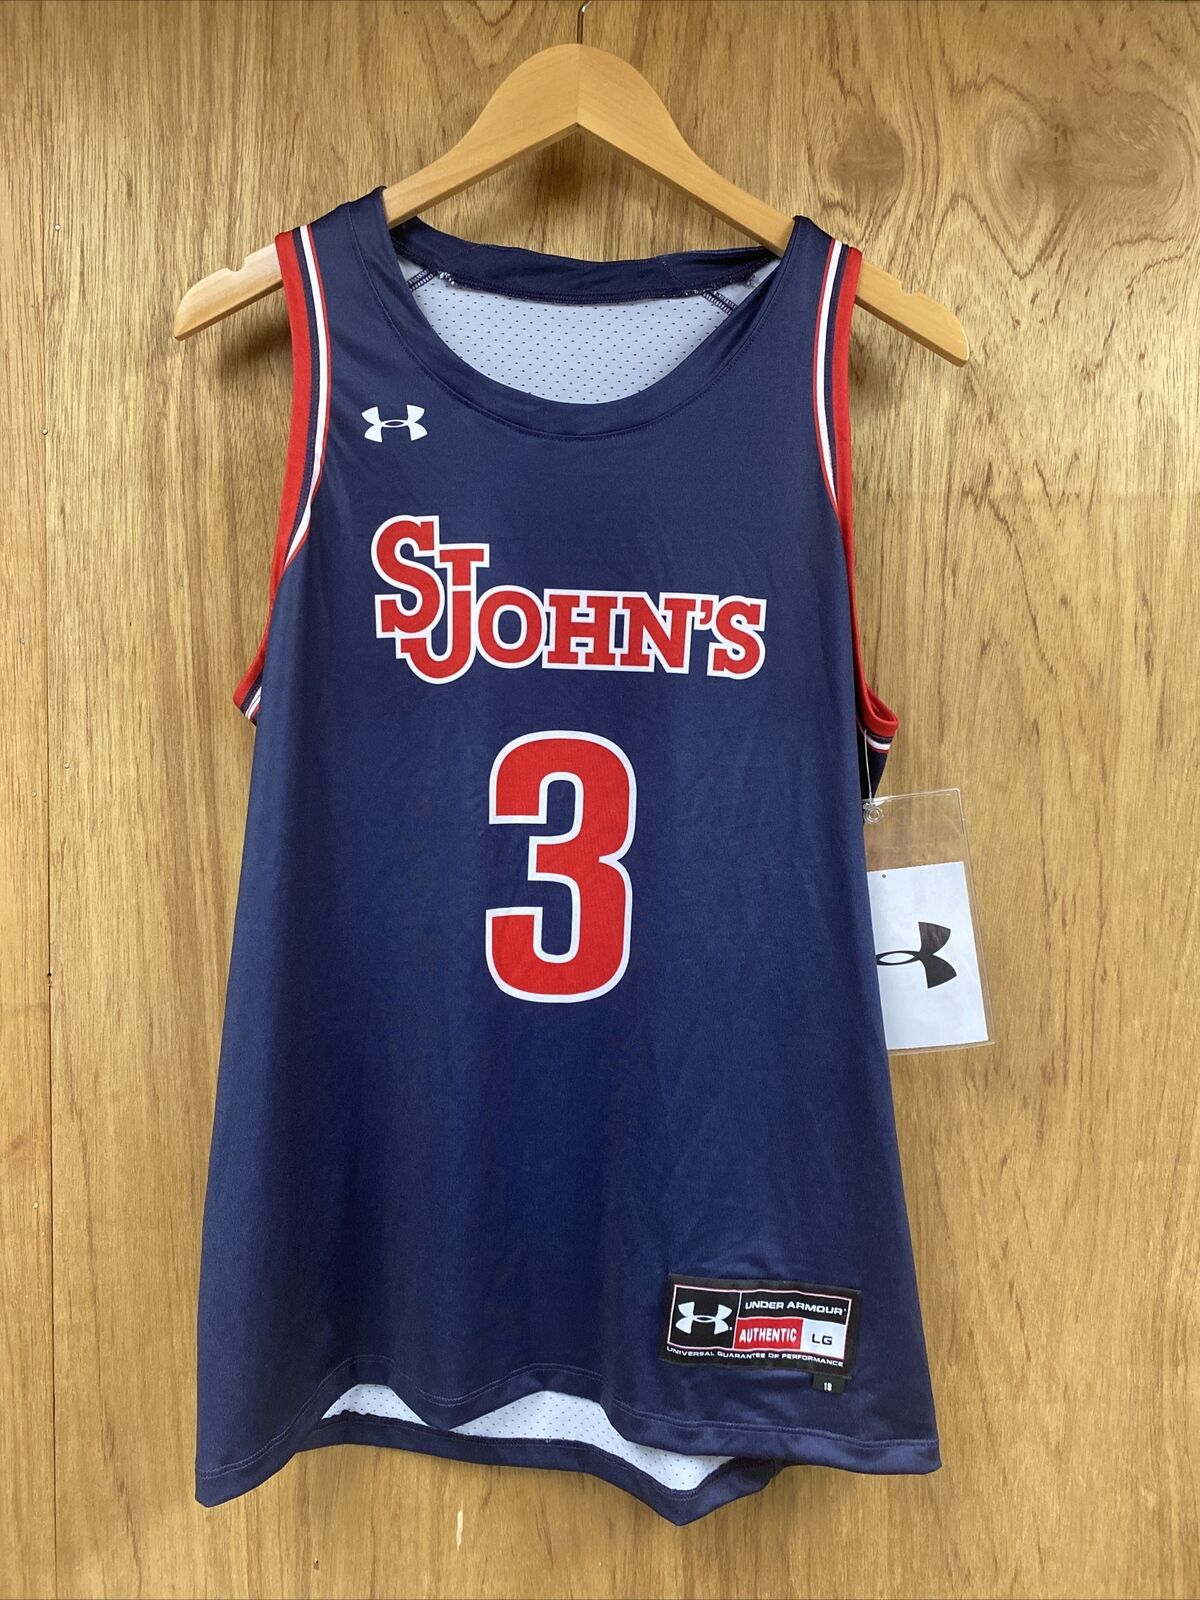 Under Armour Women's Size Large St Johns #3 Basketball Jersey Navy New Lg